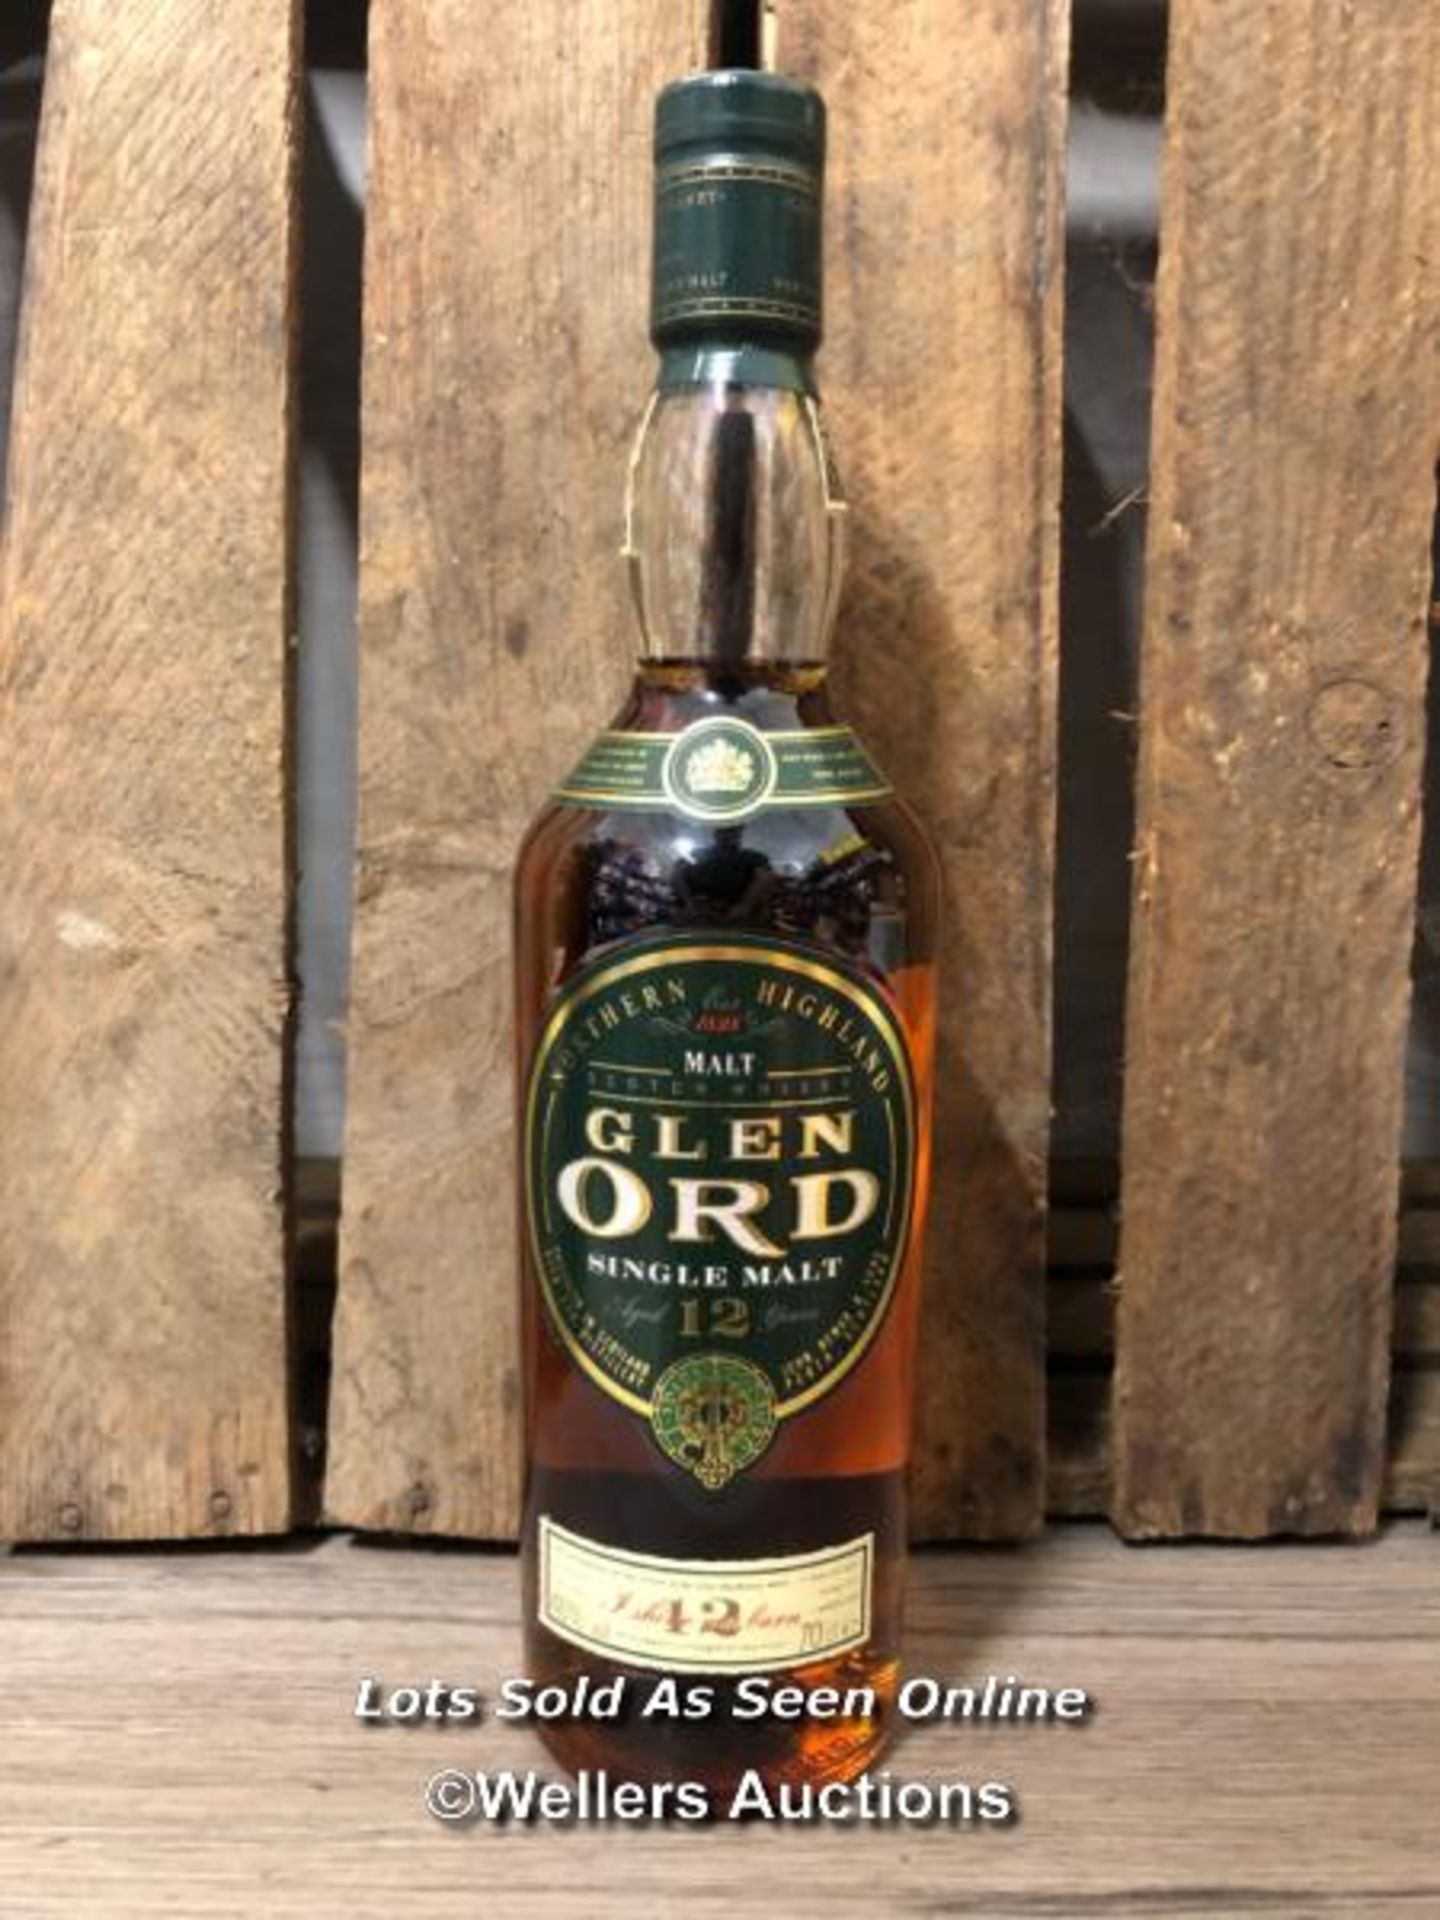 GLEN ORD 12 YEARS OLD SINGLE MALT SCOTCH WHISKY, 700ML, 40% VOL, WITH BOX - Image 2 of 5